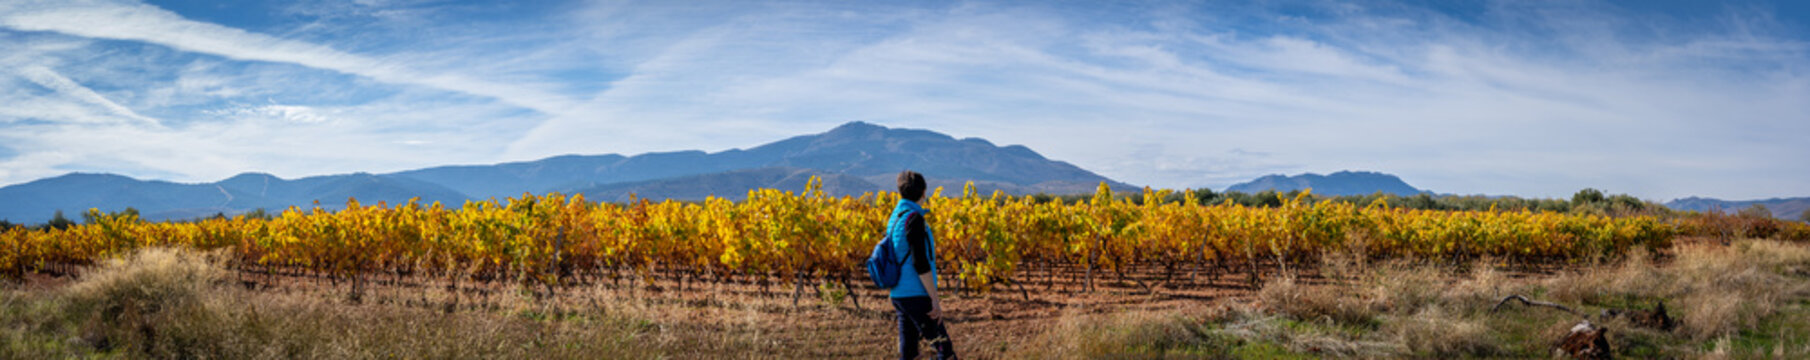 panoramic view of vineyards and women with blue sportswear and backpack walking and enjoying the vineyards in autumn.